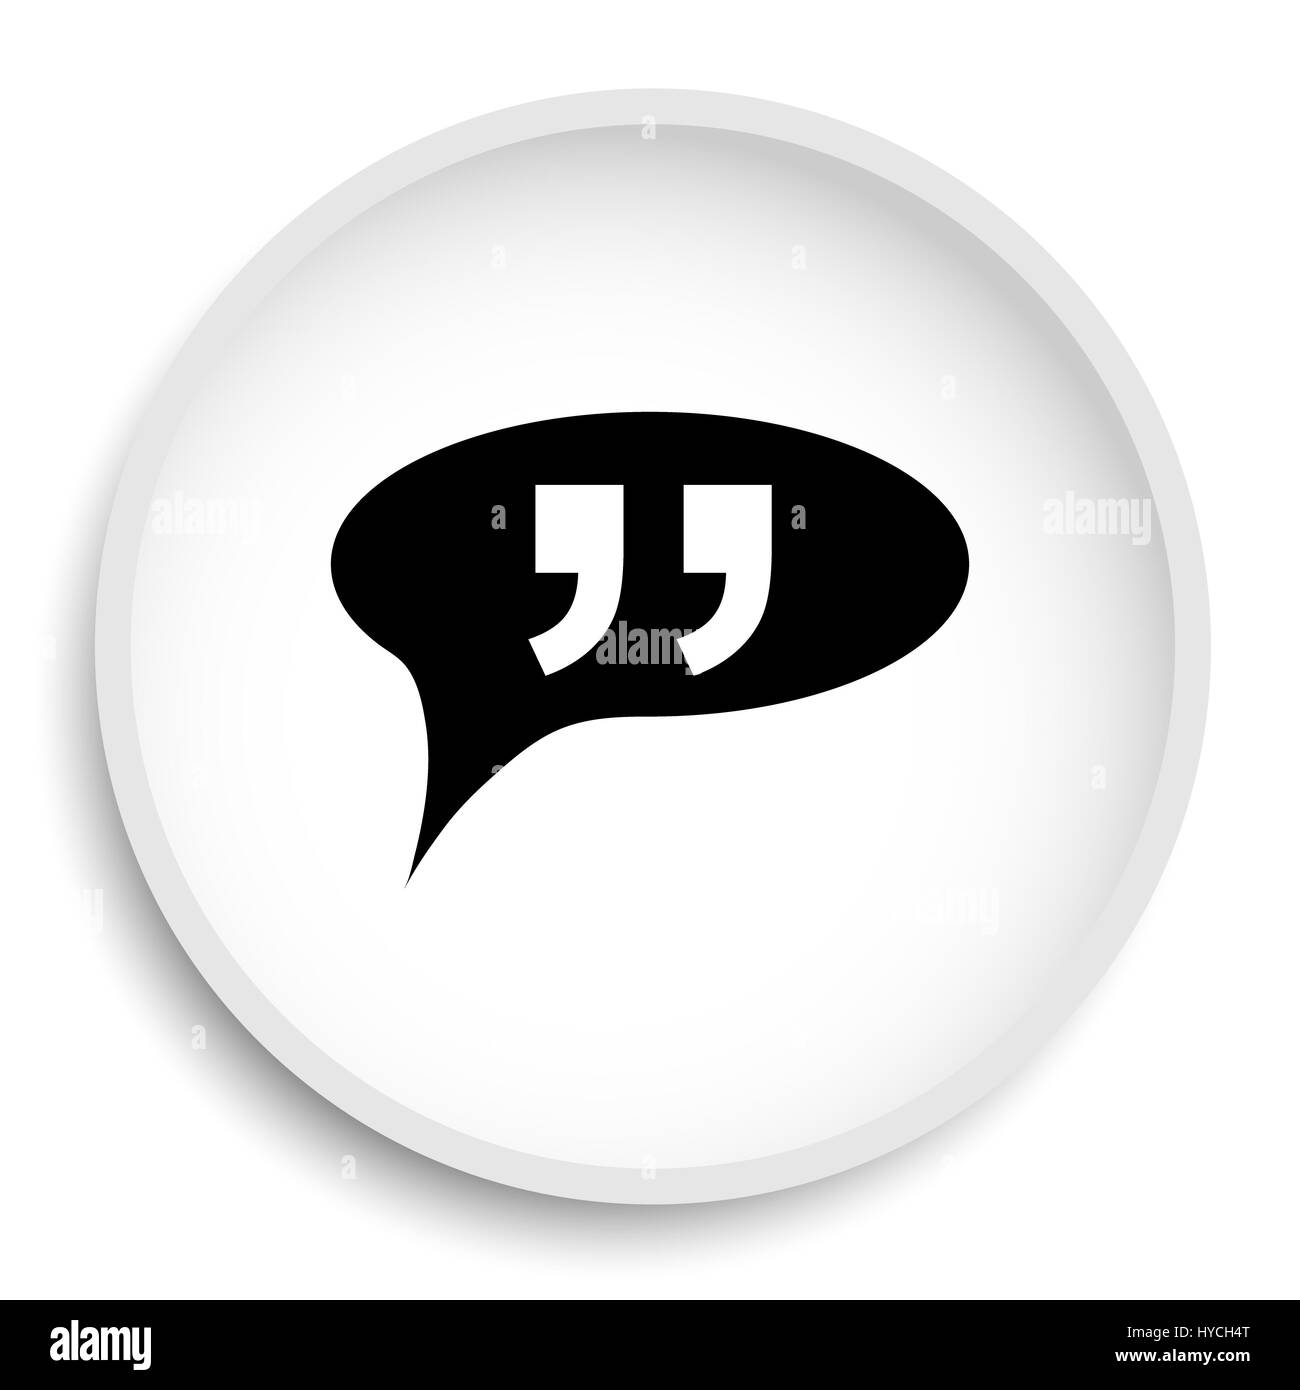 Double quotes icon. Double quotes website button on white background. Stock Photo